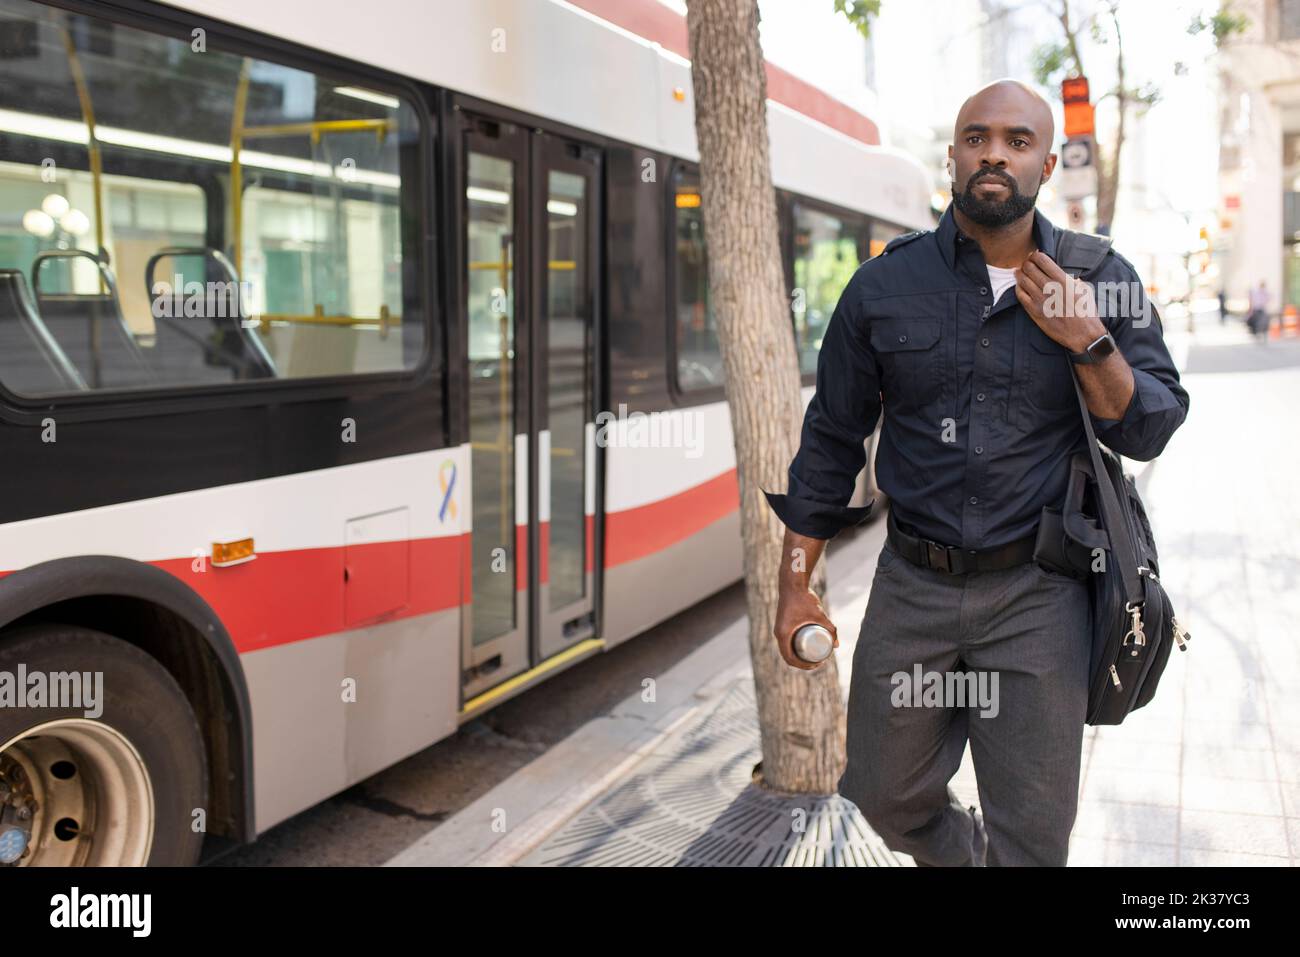 Security guard walking past bus in city center Stock Photo